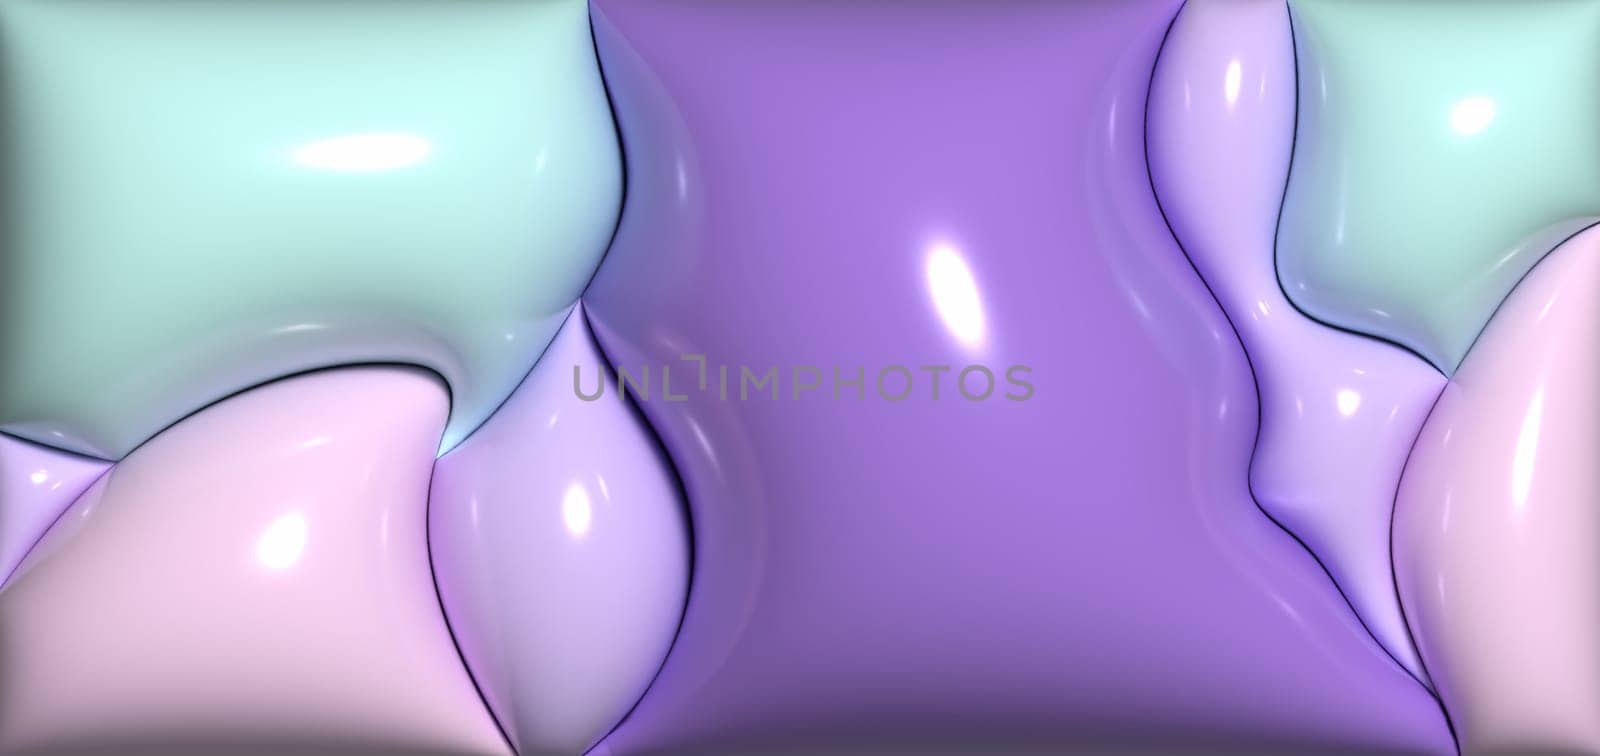 Abstract purple background with curved lines, 3D rendering illustration, inflated figures by ndanko